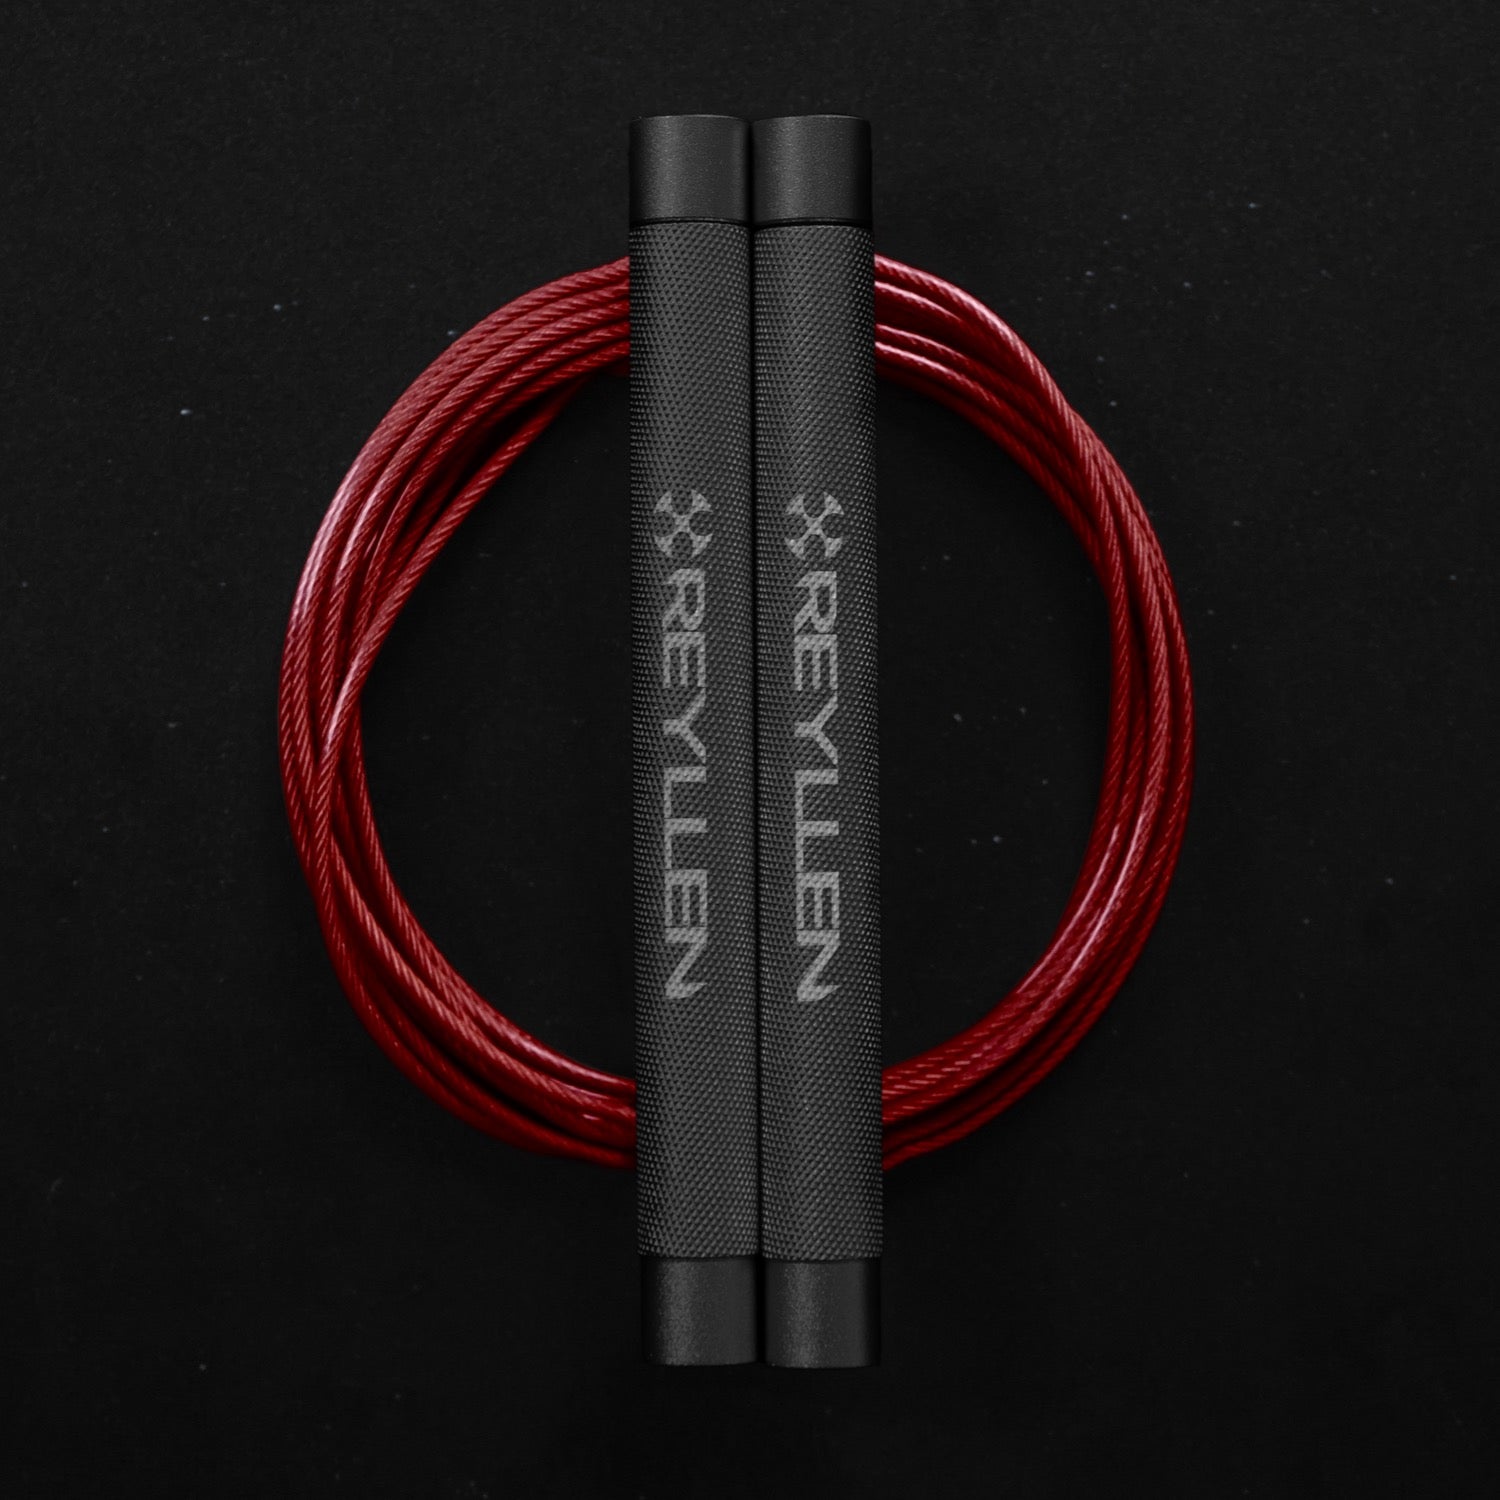 Reyllen Flare Mx Speed Skipping Jump Rope - Aluminium Handles - grey with red pvc cable